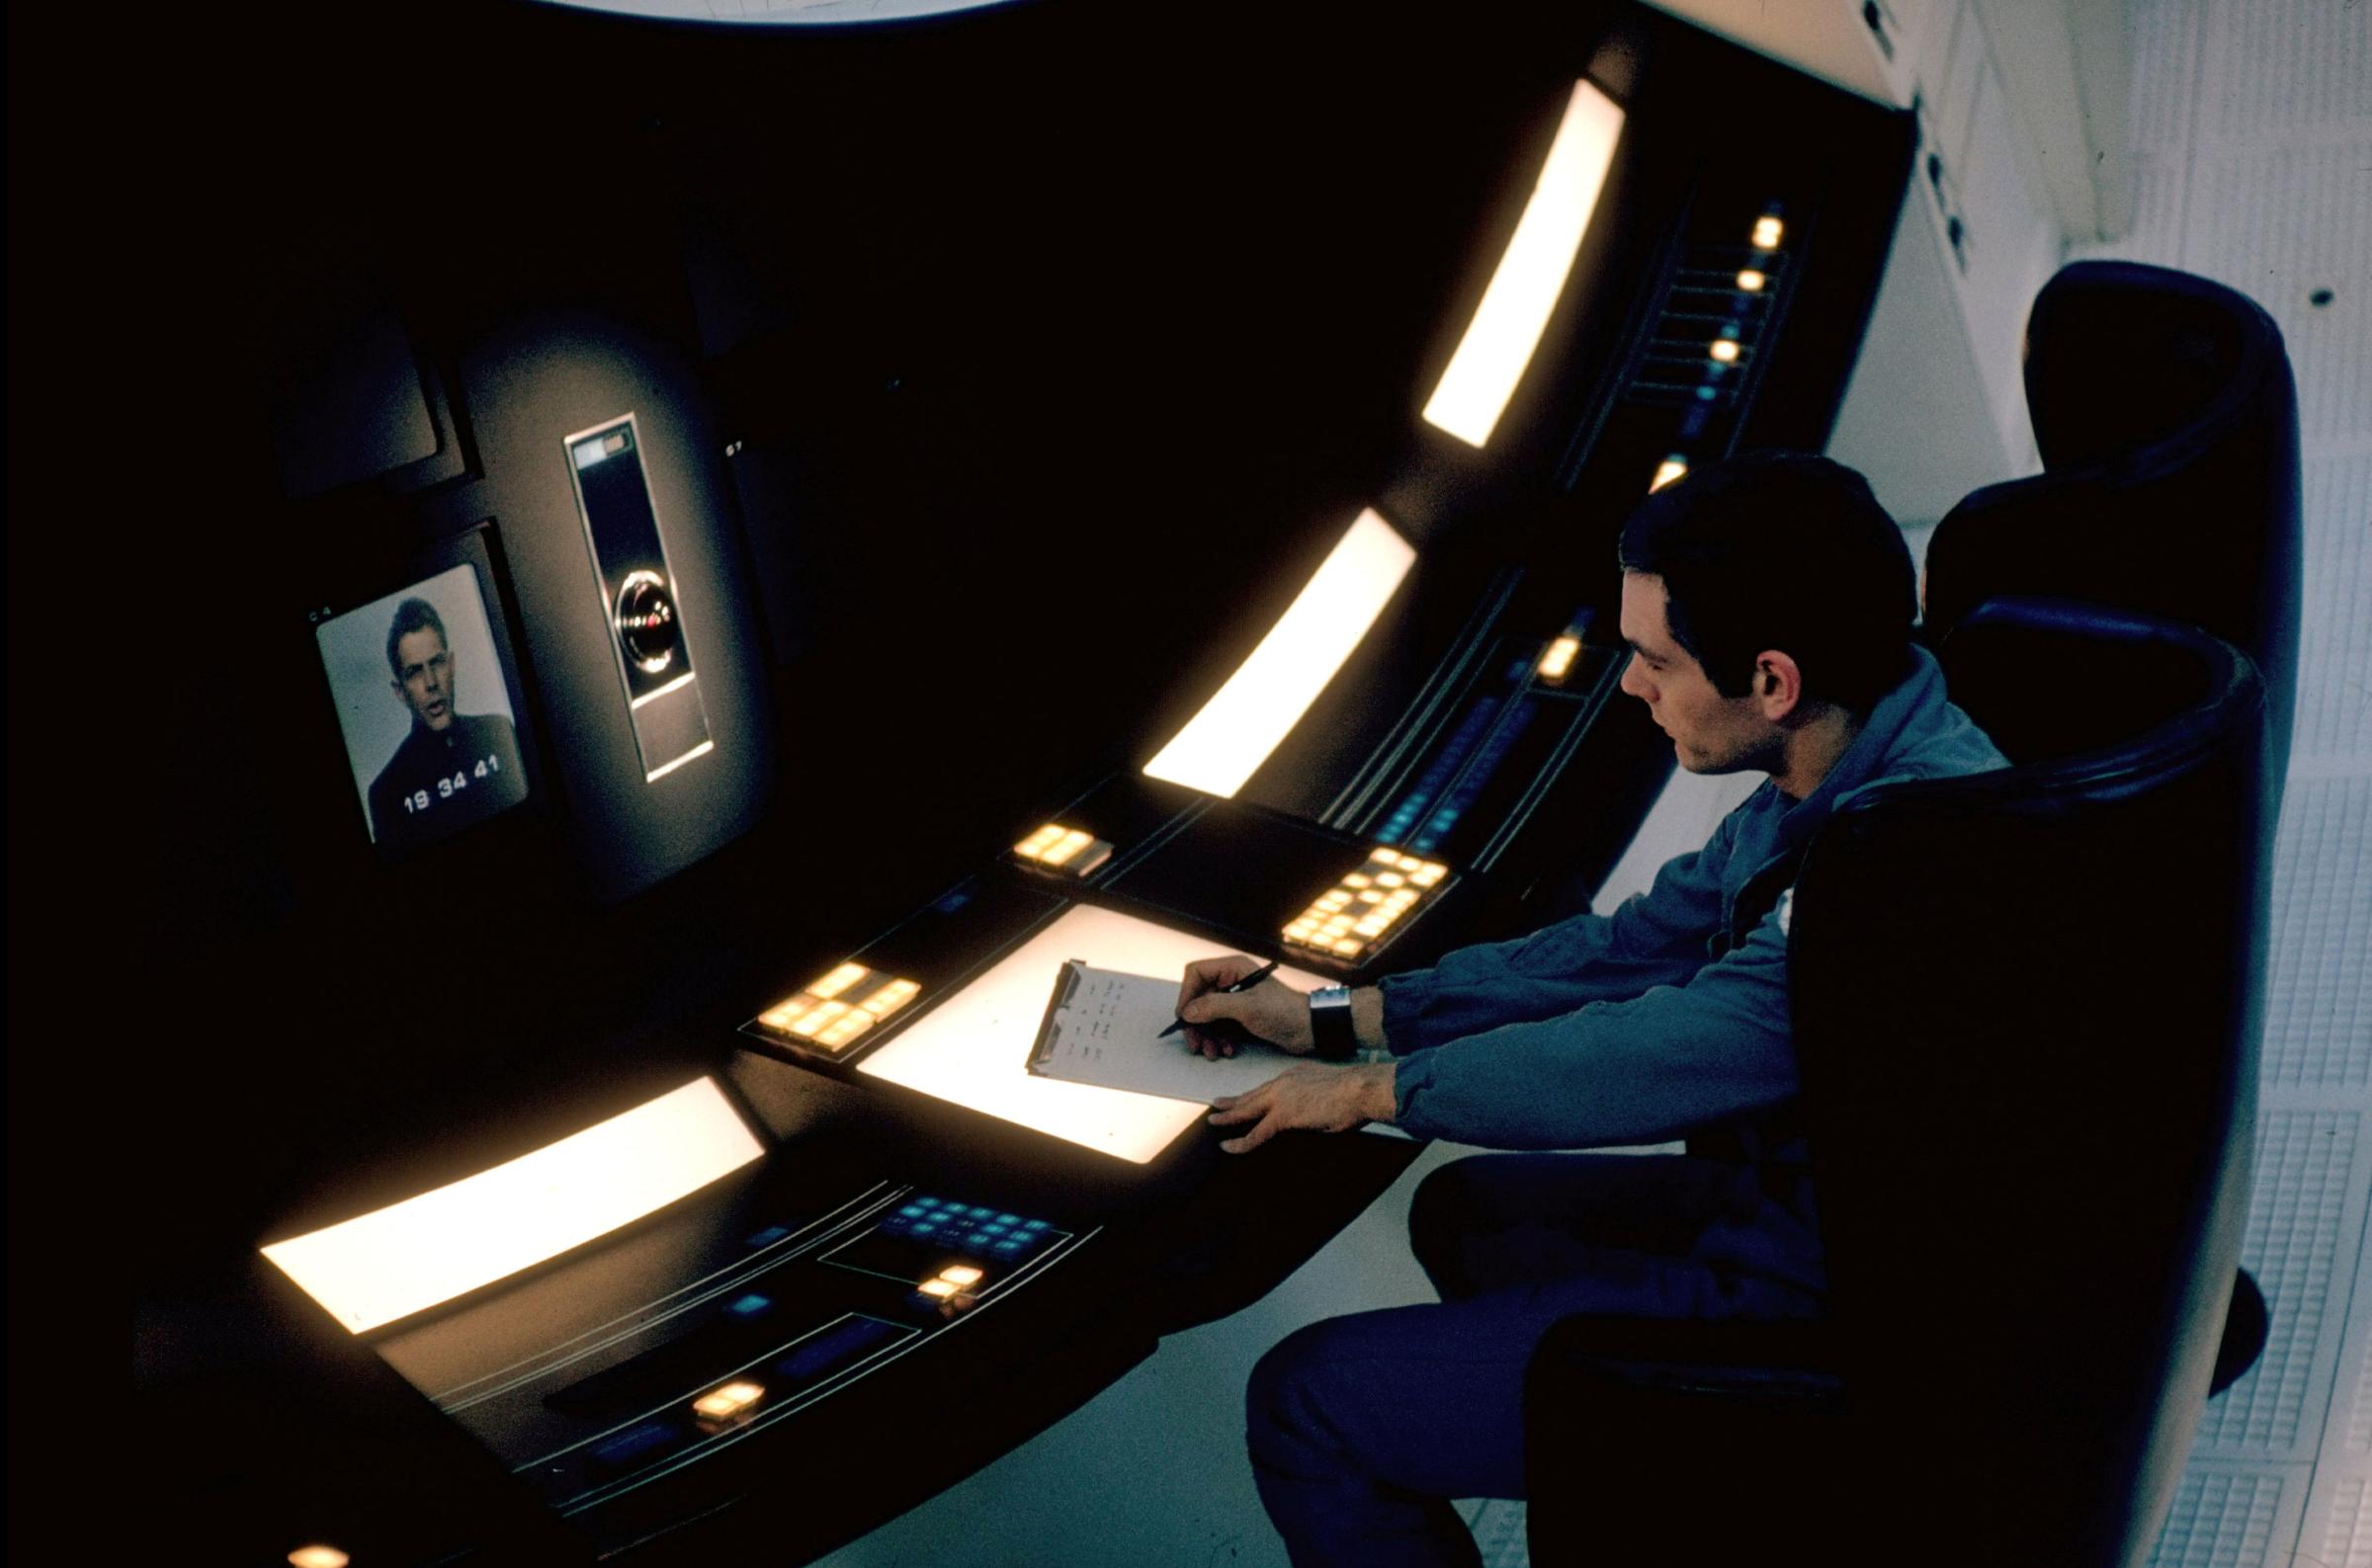 On the set of Stanley Kubrick's '2001: A Space Odyssey'